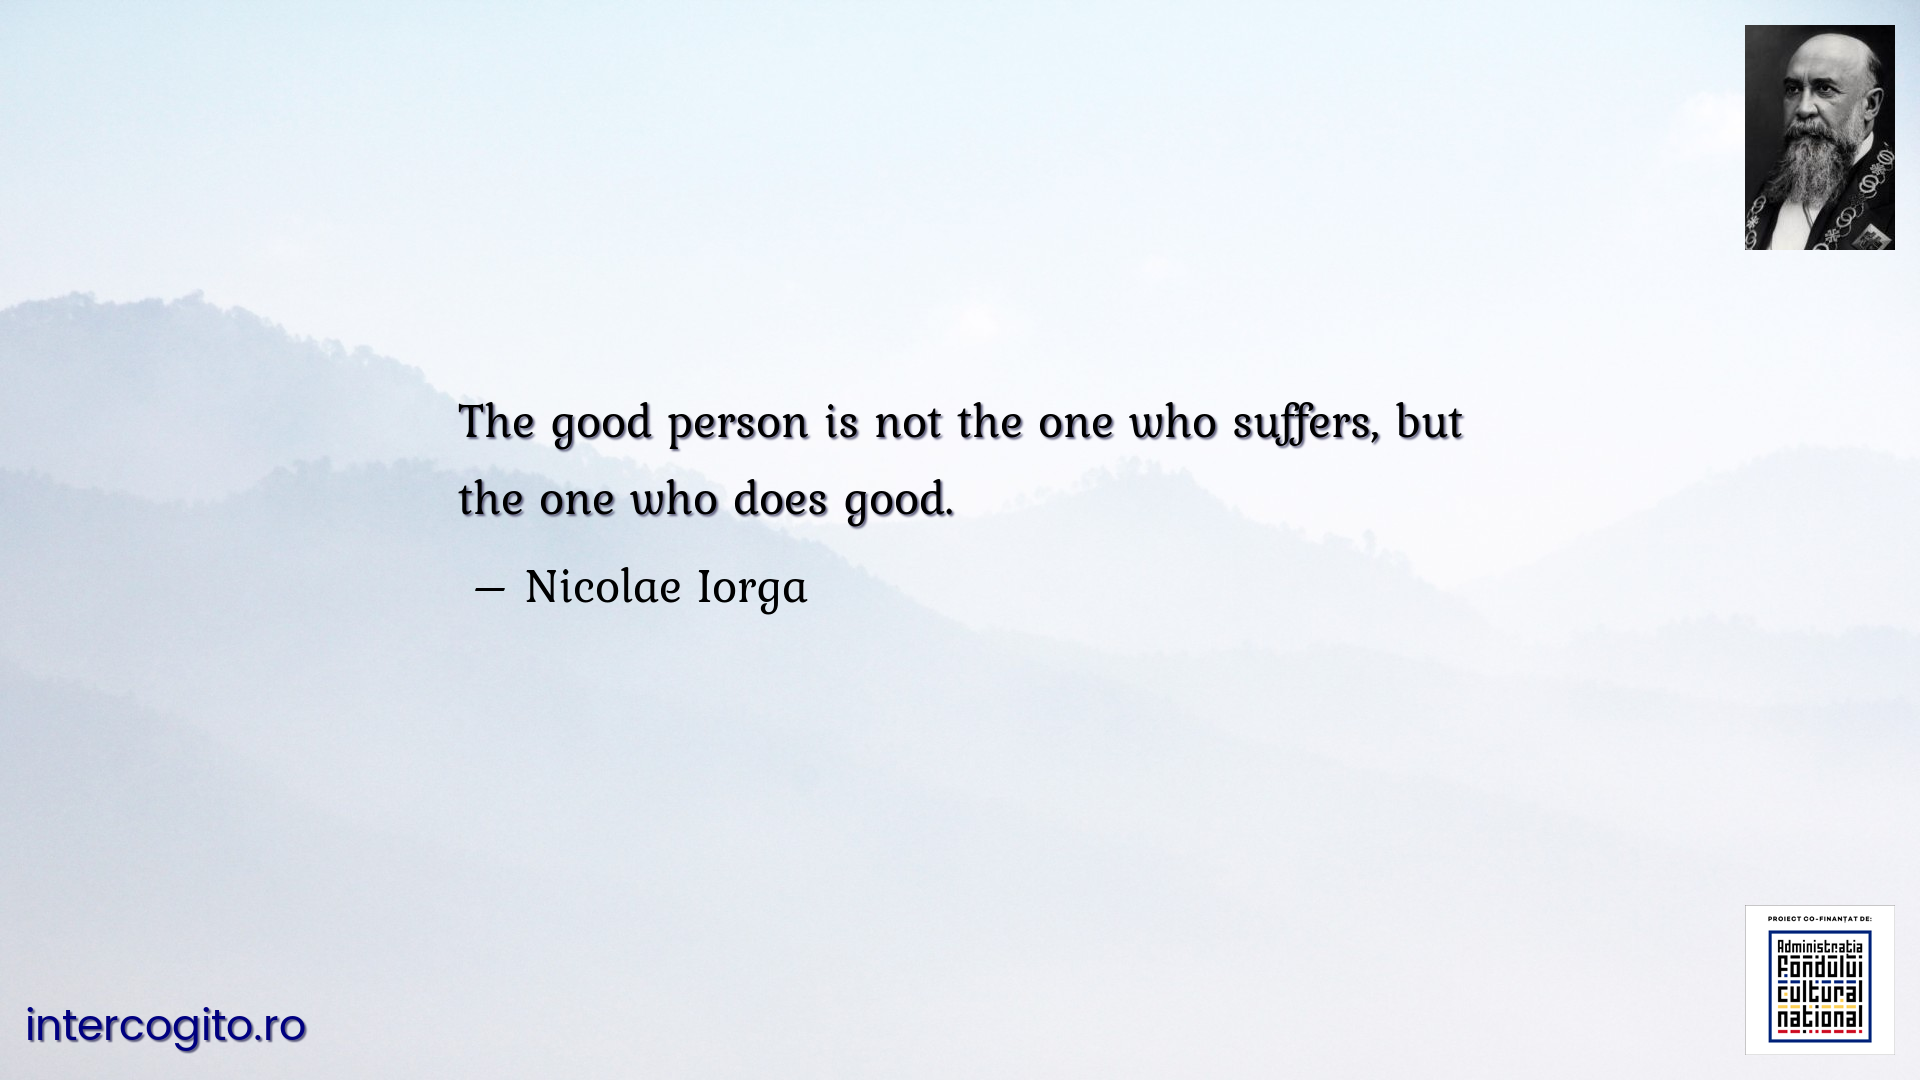 The good person is not the one who suffers, but the one who does good.